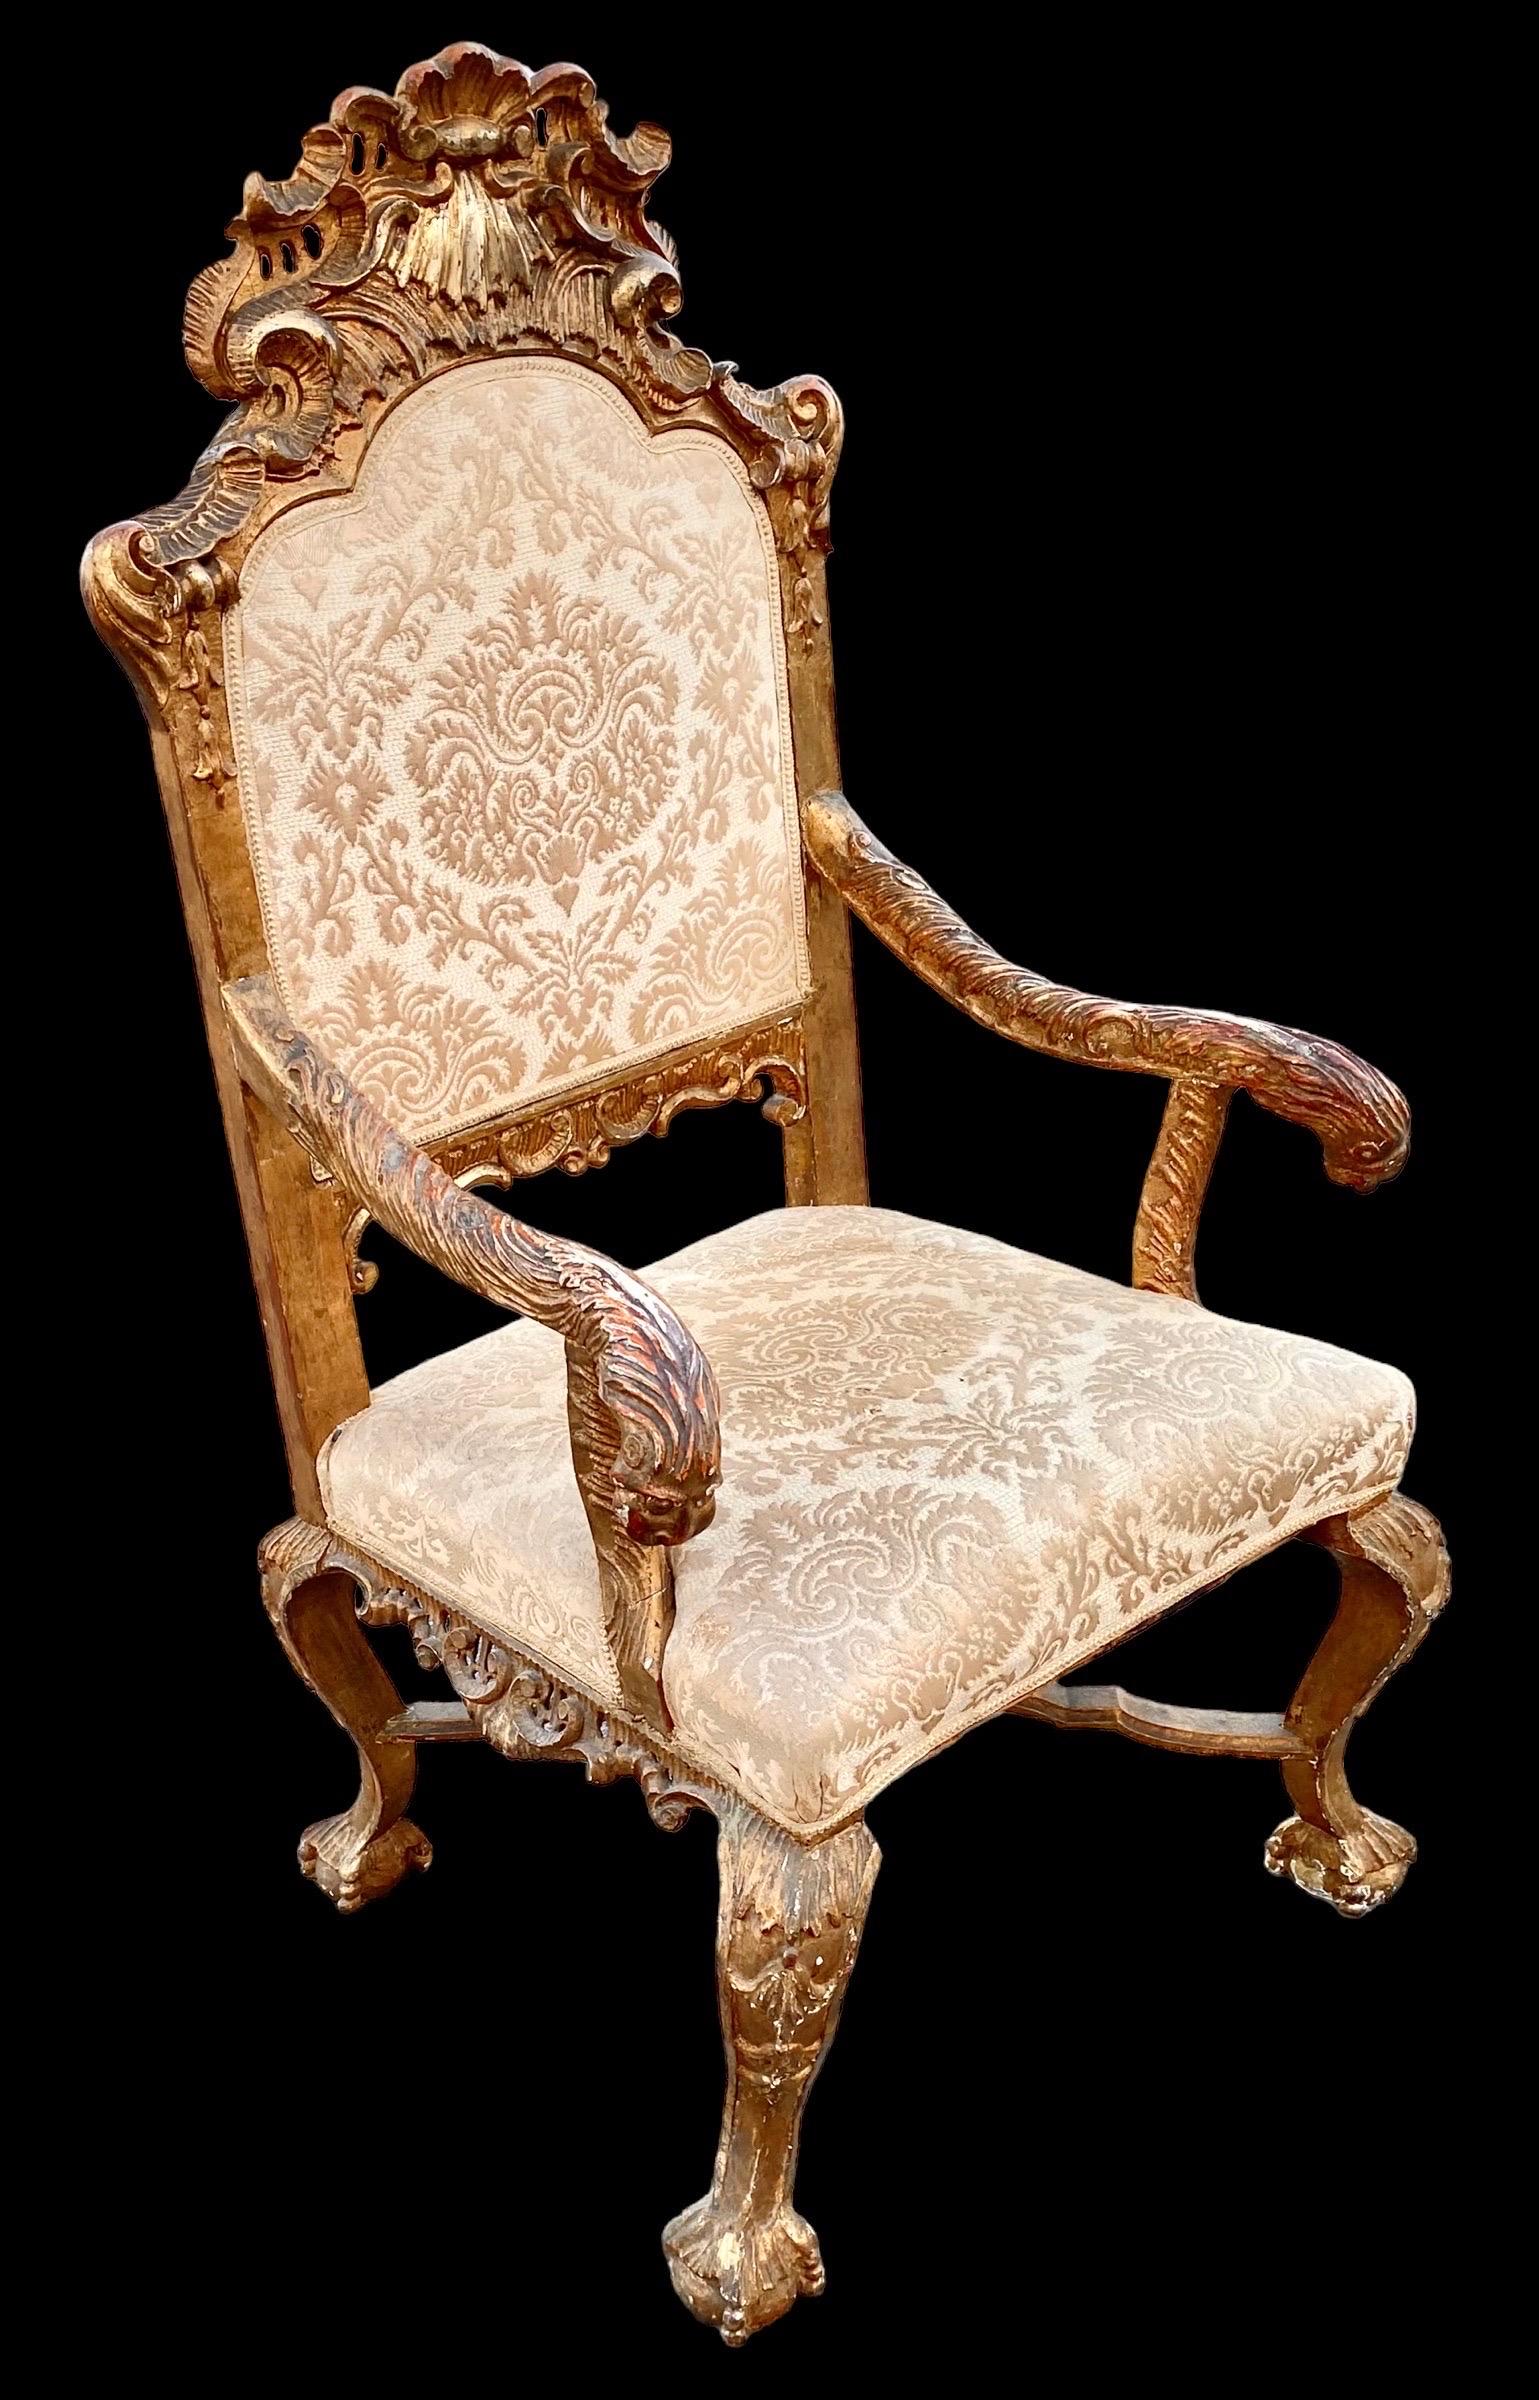 Hand-Carved Antique 18th century Italian Rococo Giltwood Armchair For Sale